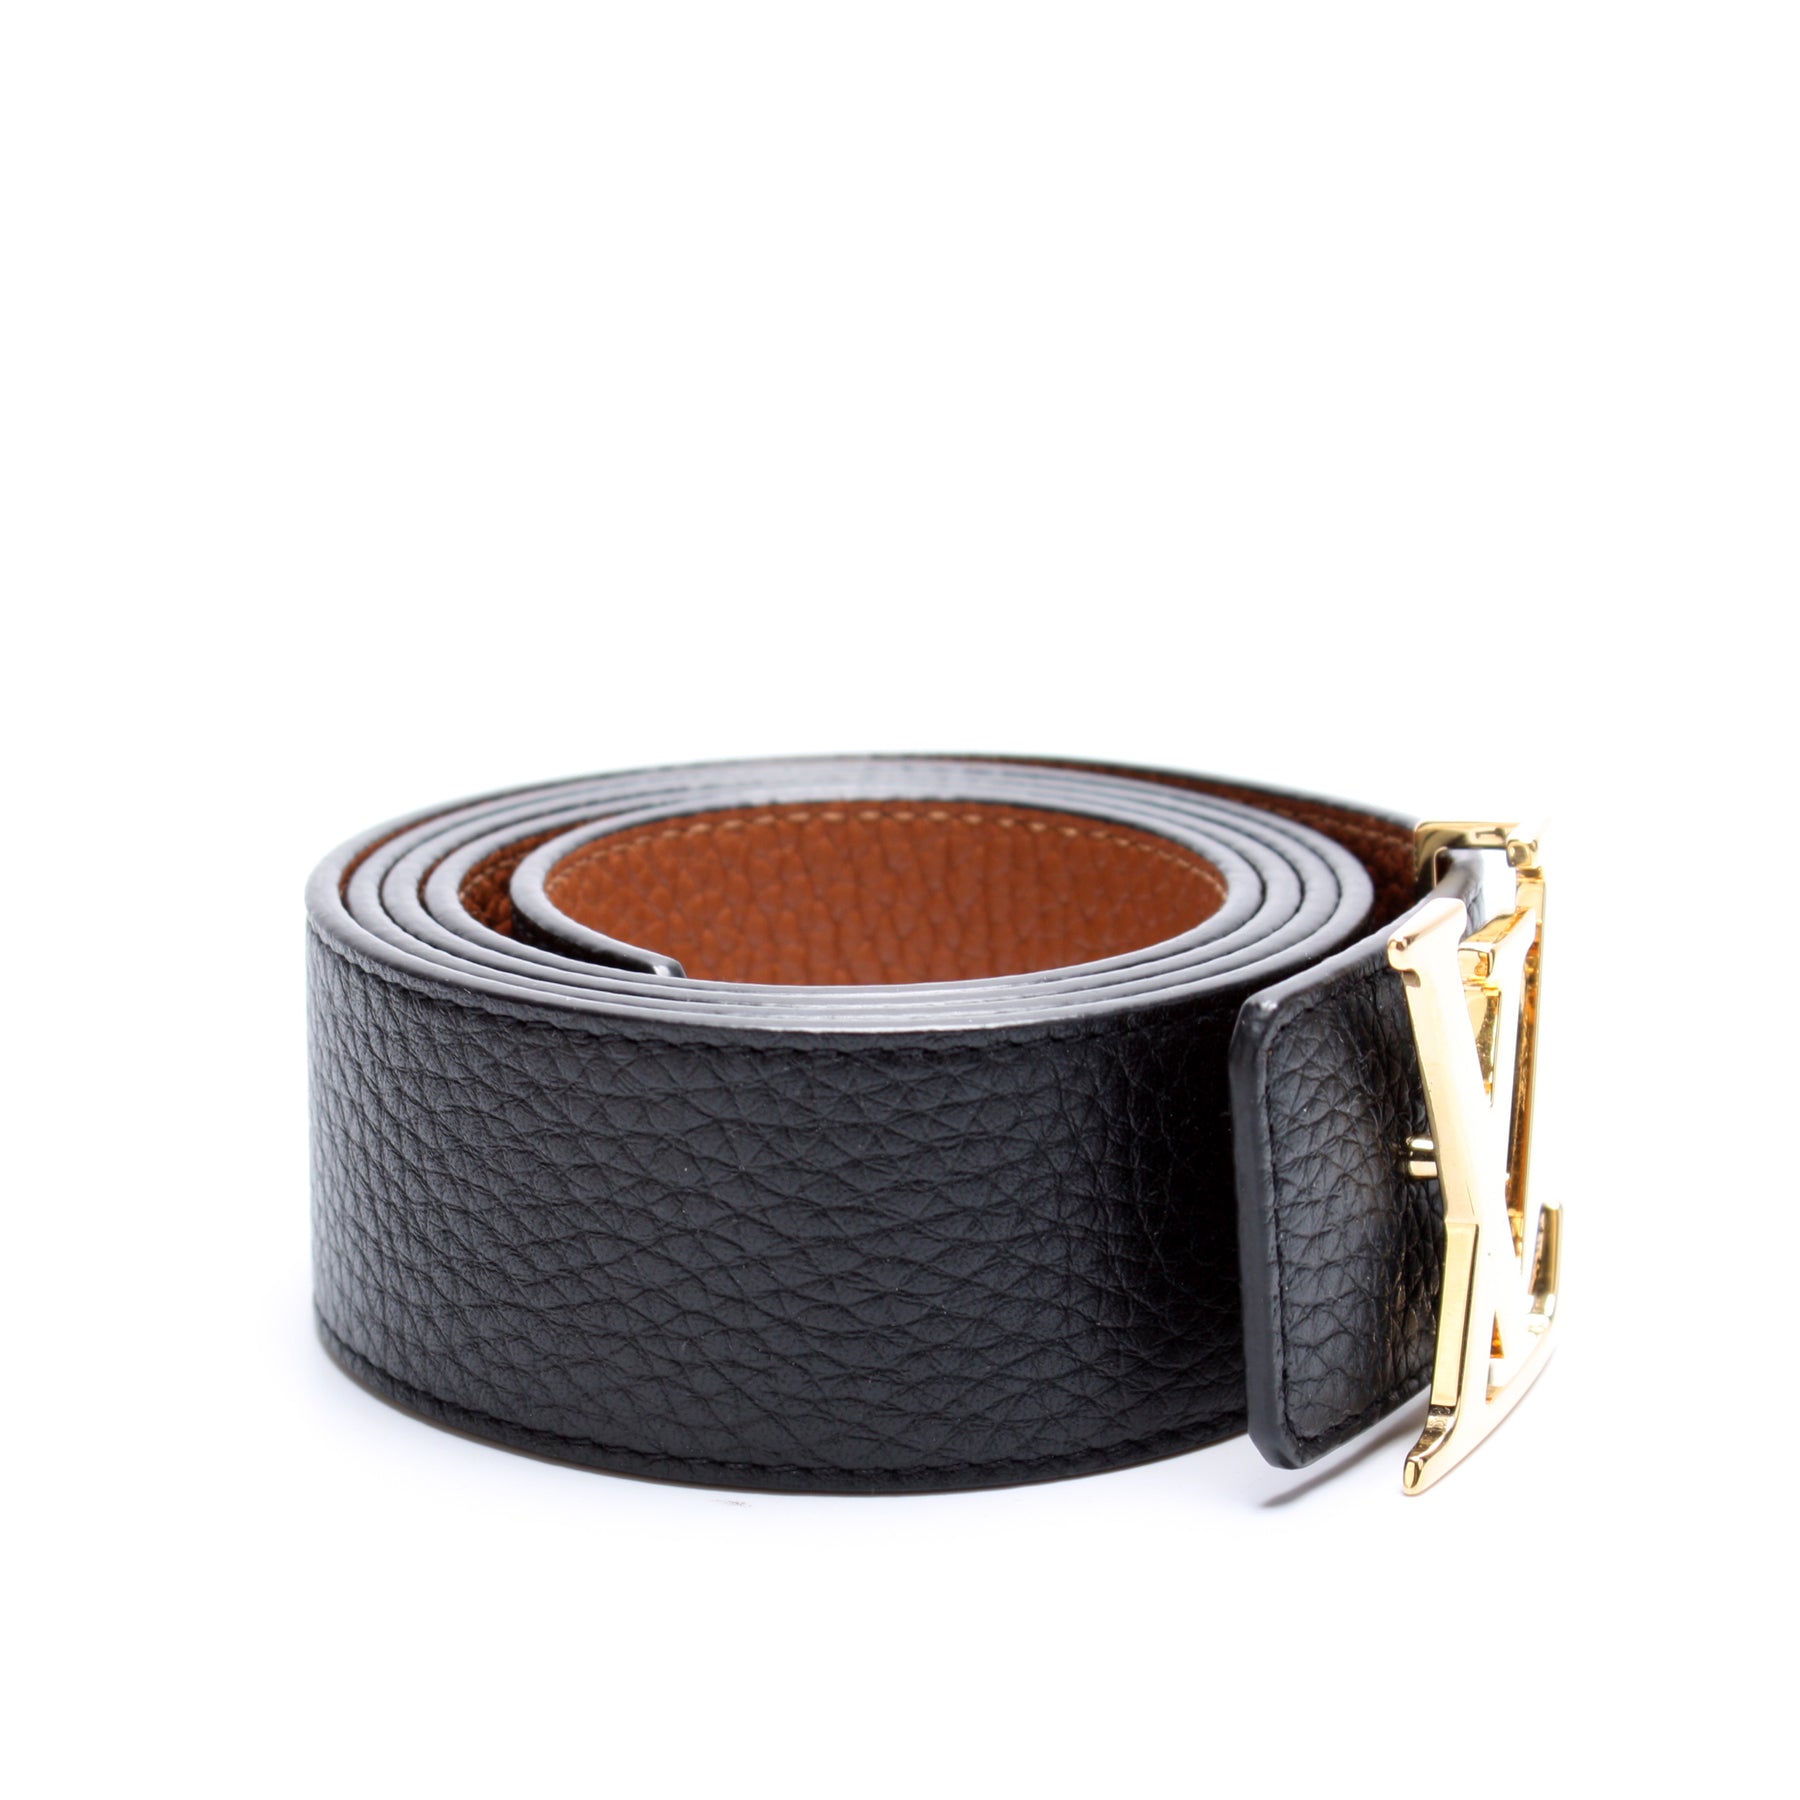 Louis Vuitton LV Initiales 40mm Reversible Belt Anthracite Leather. Size 100 cm